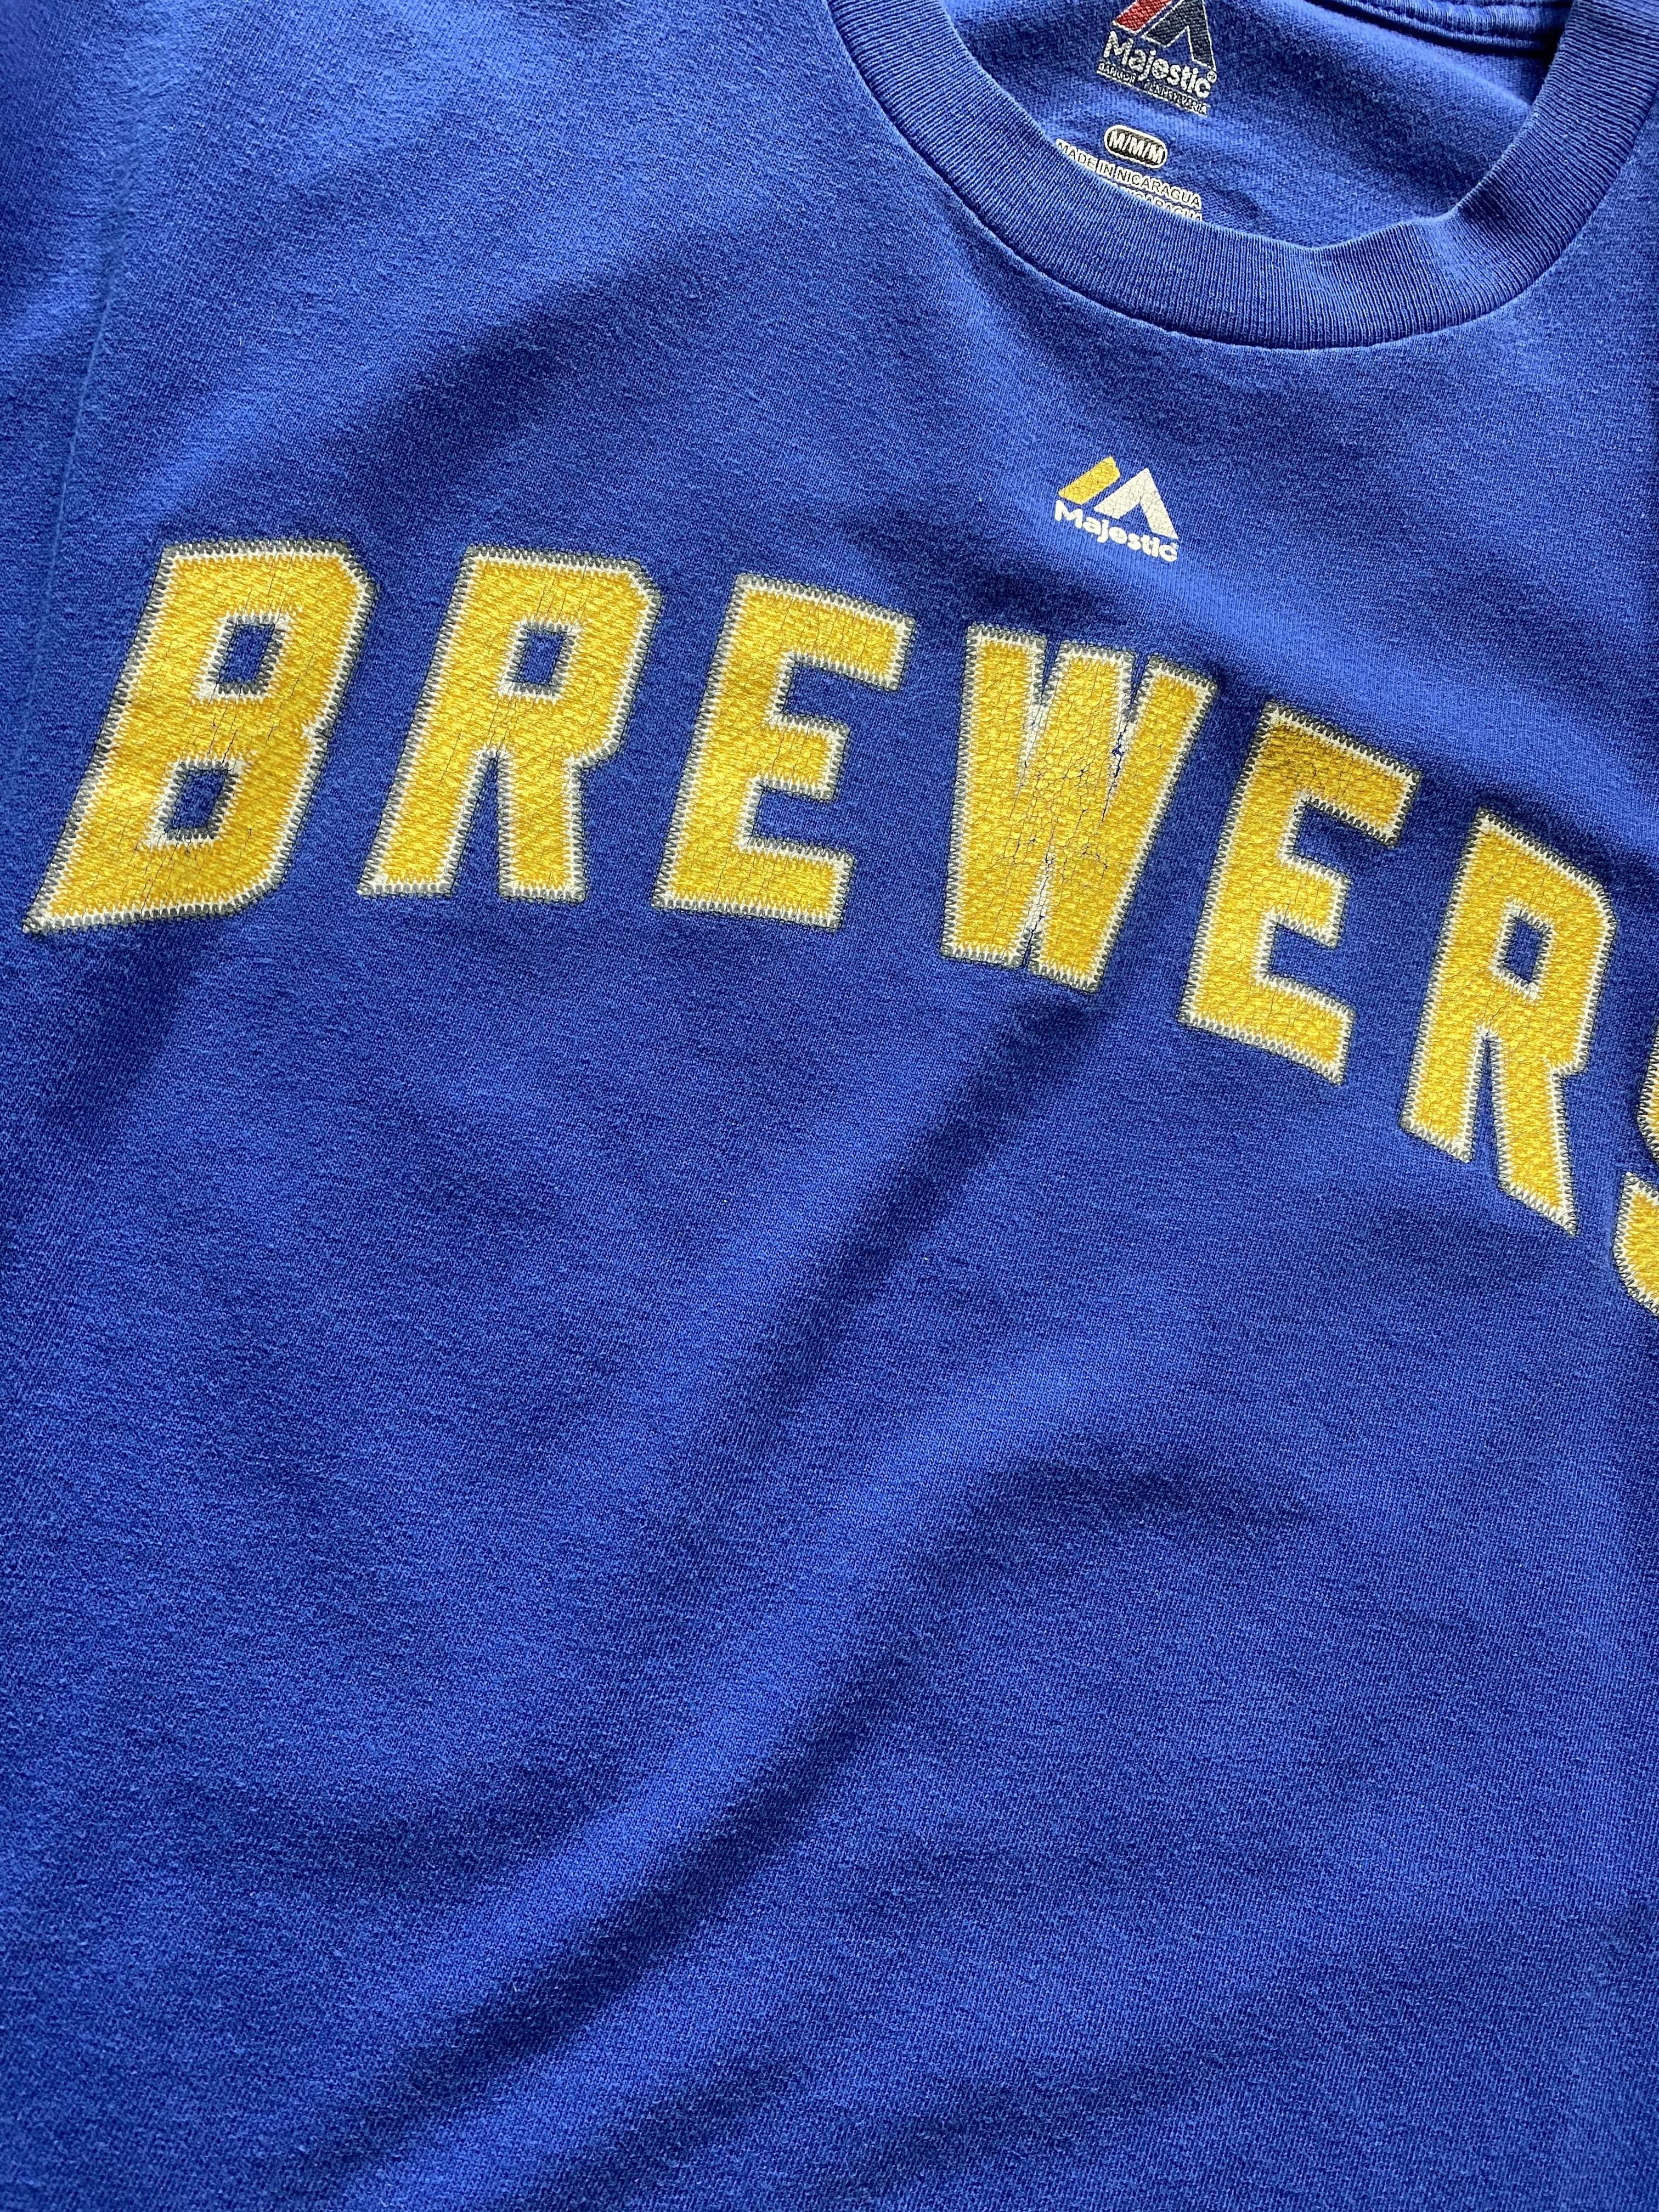 Vintage Majestic Brewers Shirt Blue // X-Small - RHAGHOUSE VINTAGE